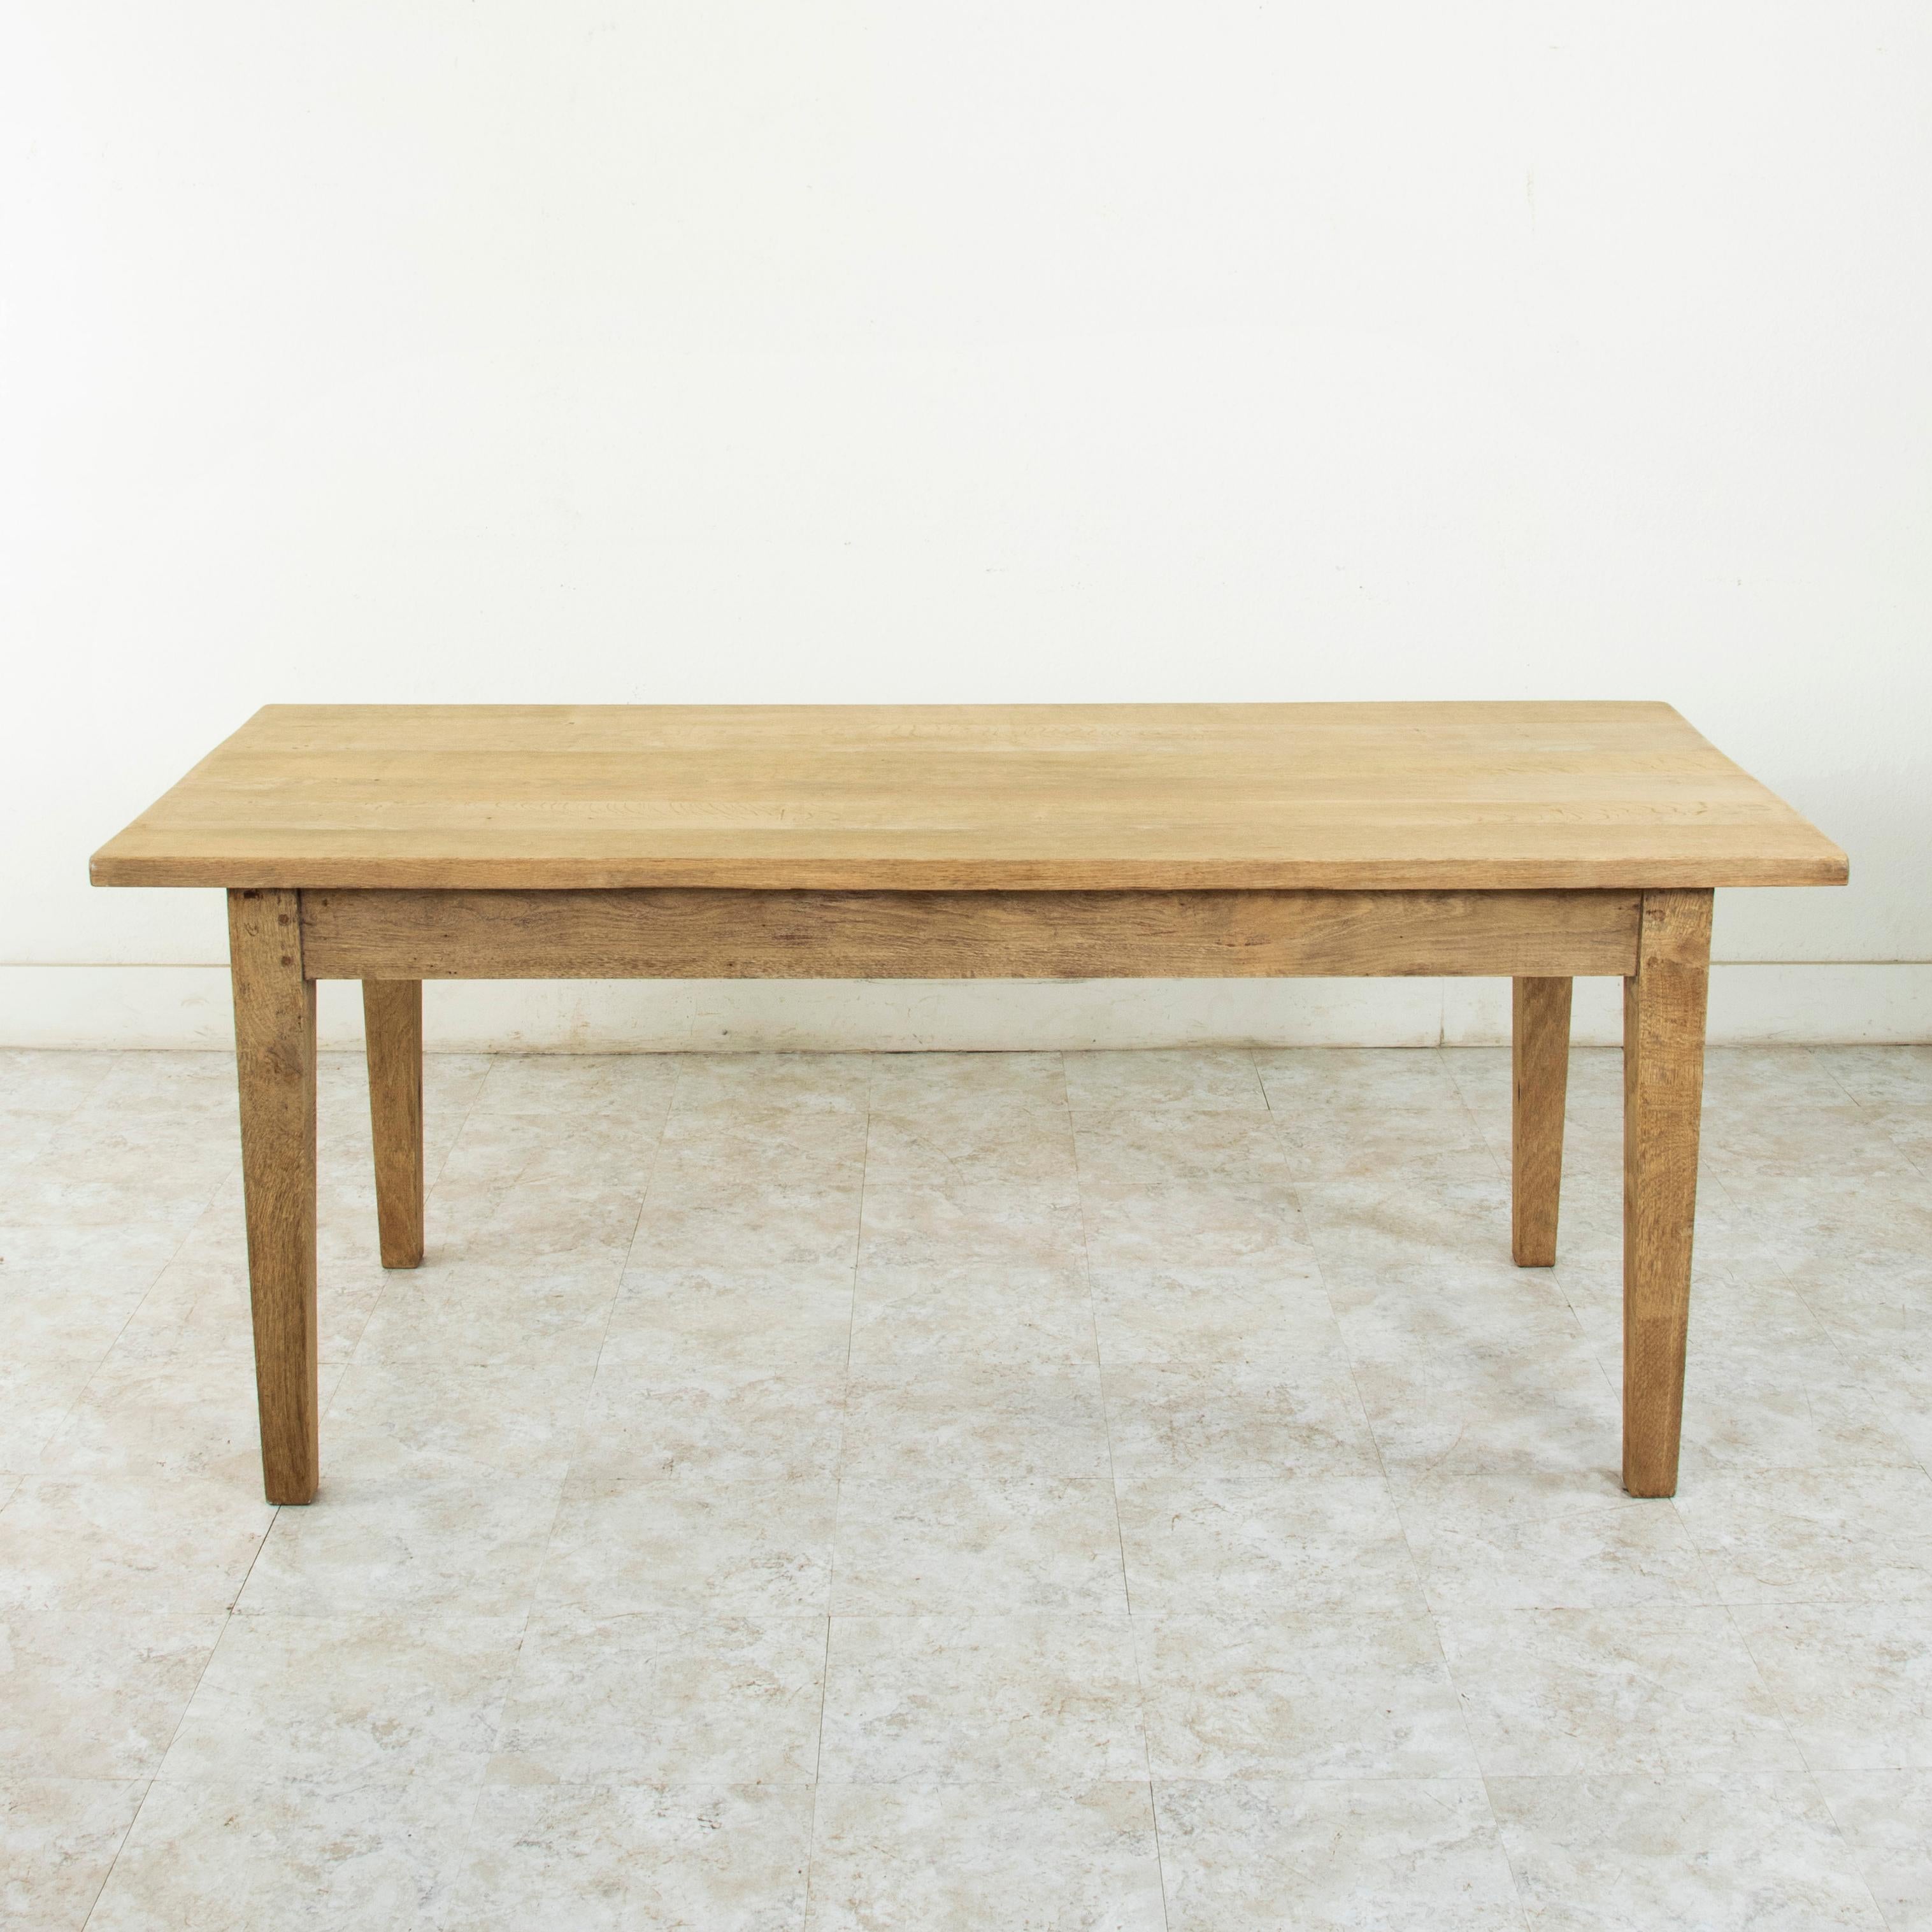 This turn of the 20th century oak farm table or dining table from the Le Perche, a sub-region of Normandy, France, features a top constructed of six planks of wood. Joined by splines that run the entire length of the table. This construction